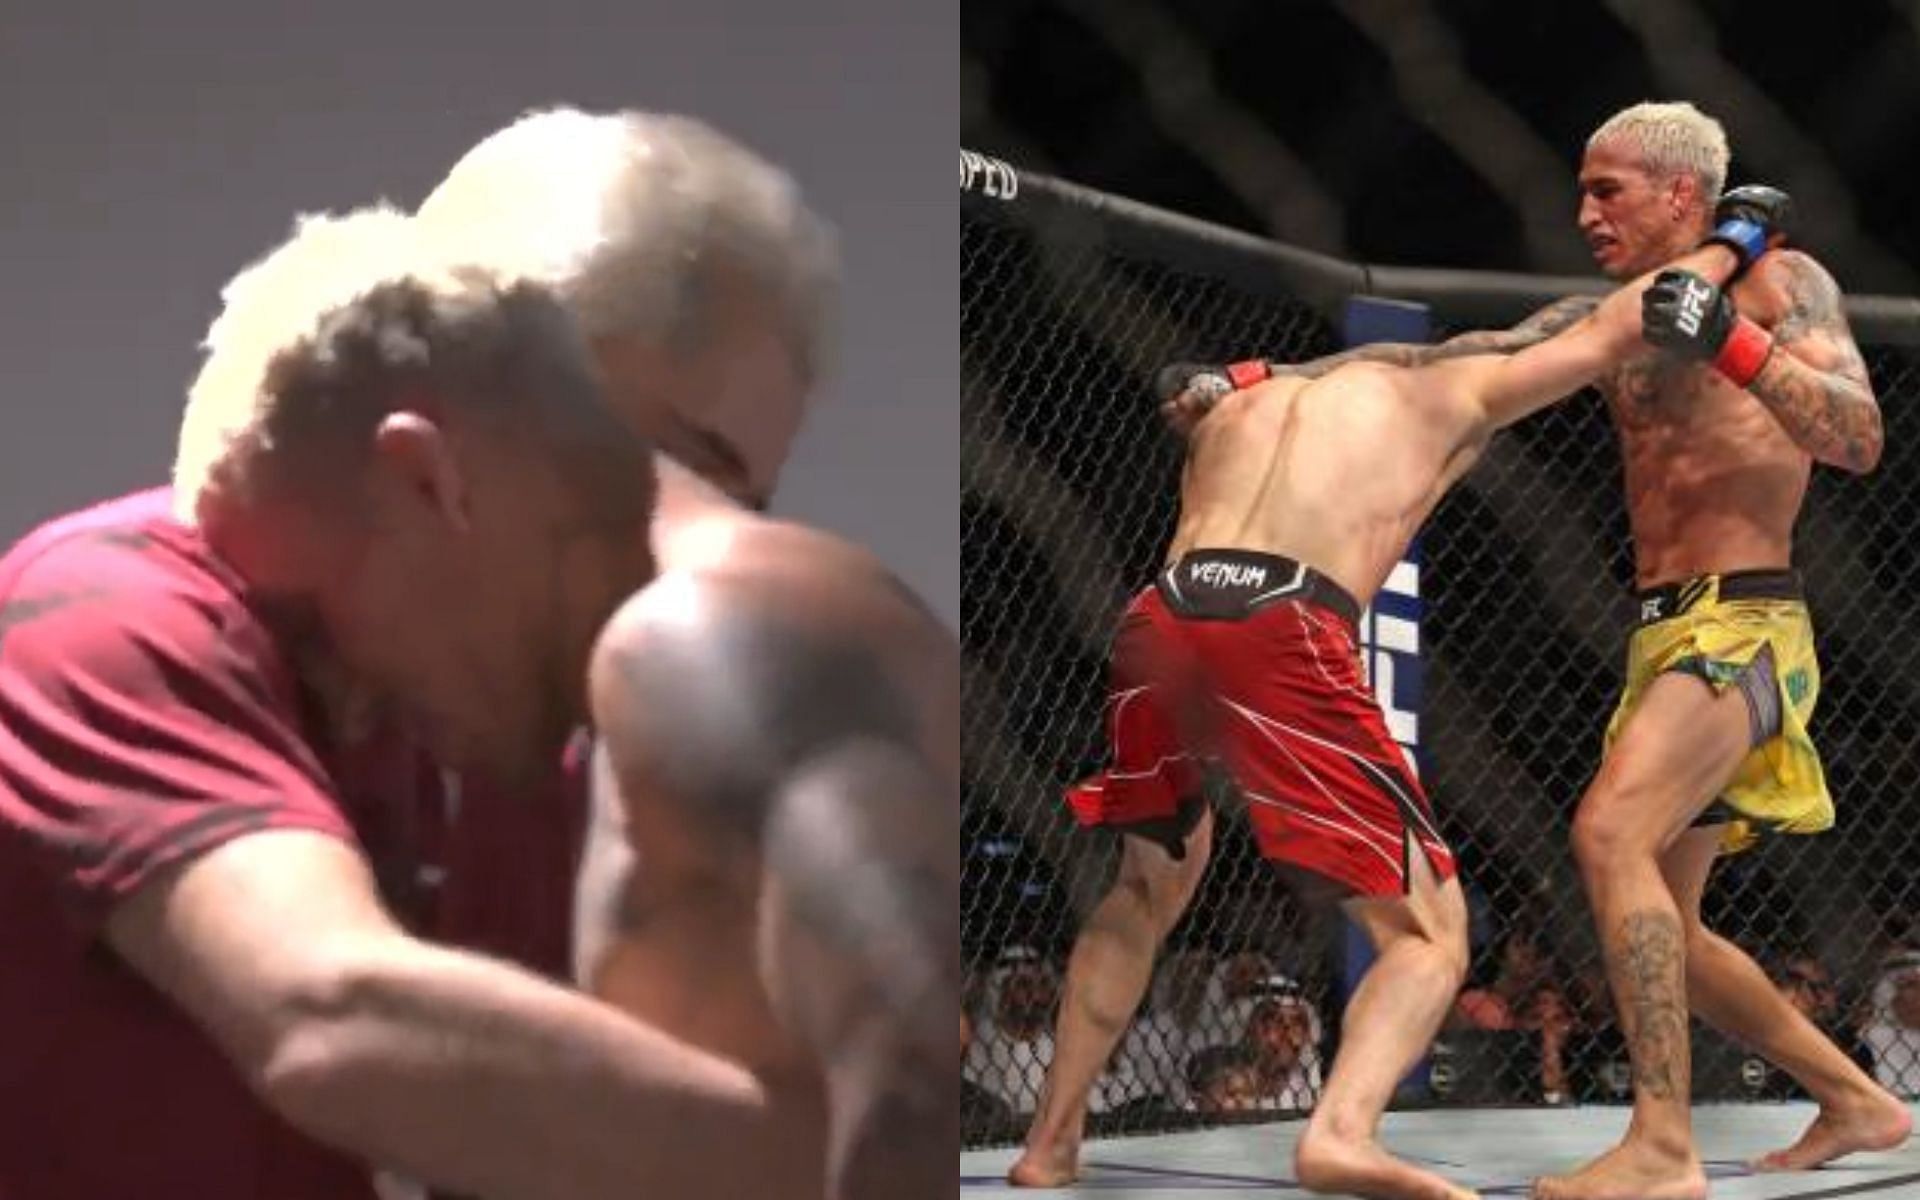 Charles Oliveira being consoled by team after UFC 280 (left) [Image courtesy: @fullcombat on Twitter] and Oliveira vs. Islam Makhachev (right)